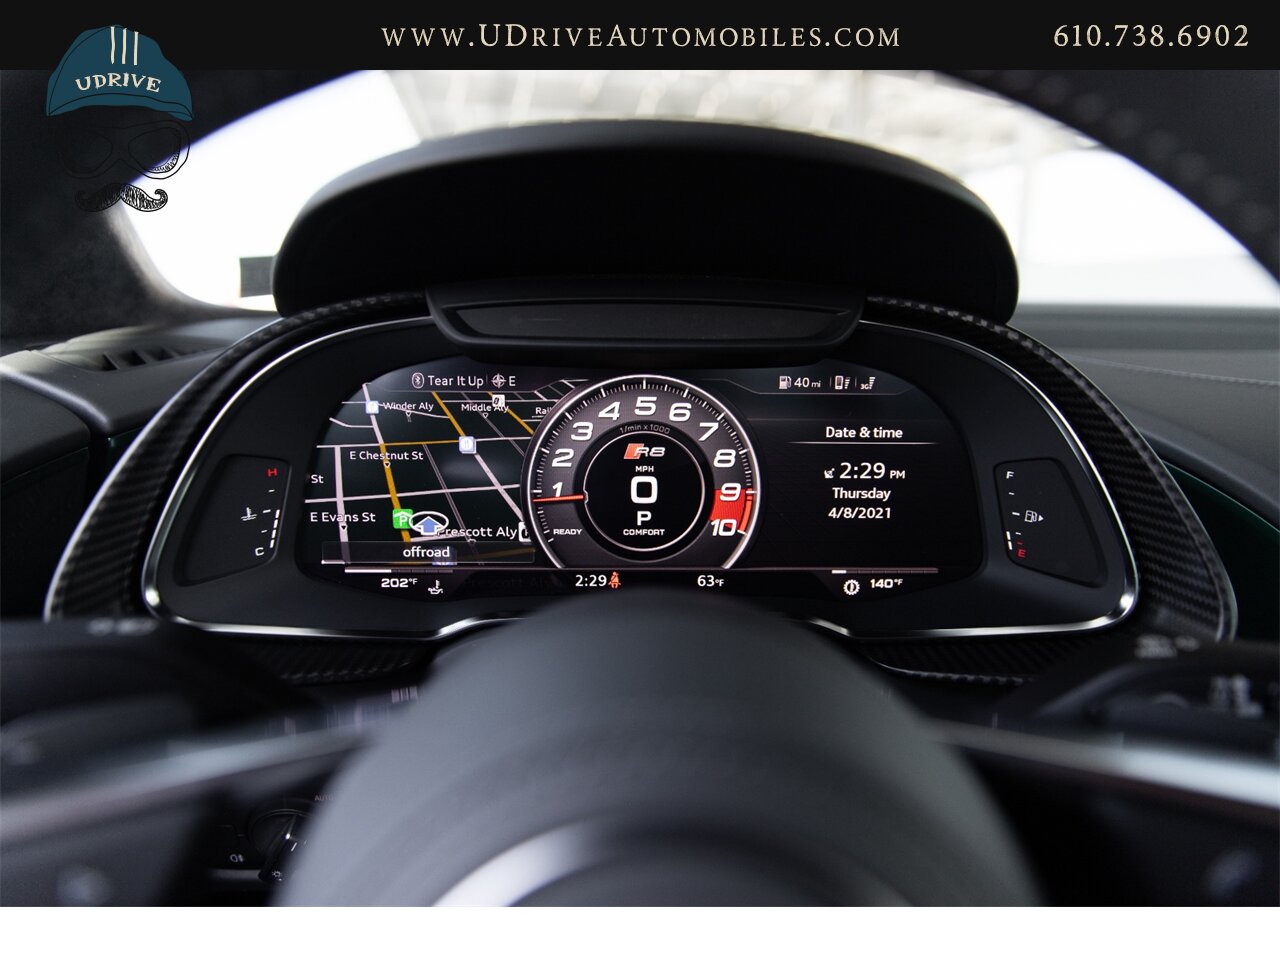 2017 Audi R8 Audi Exclusive Avocado Green Vermont Brown Leather  Diamond Stitching V10 Carbon Fiber - Photo 37 - West Chester, PA 19382